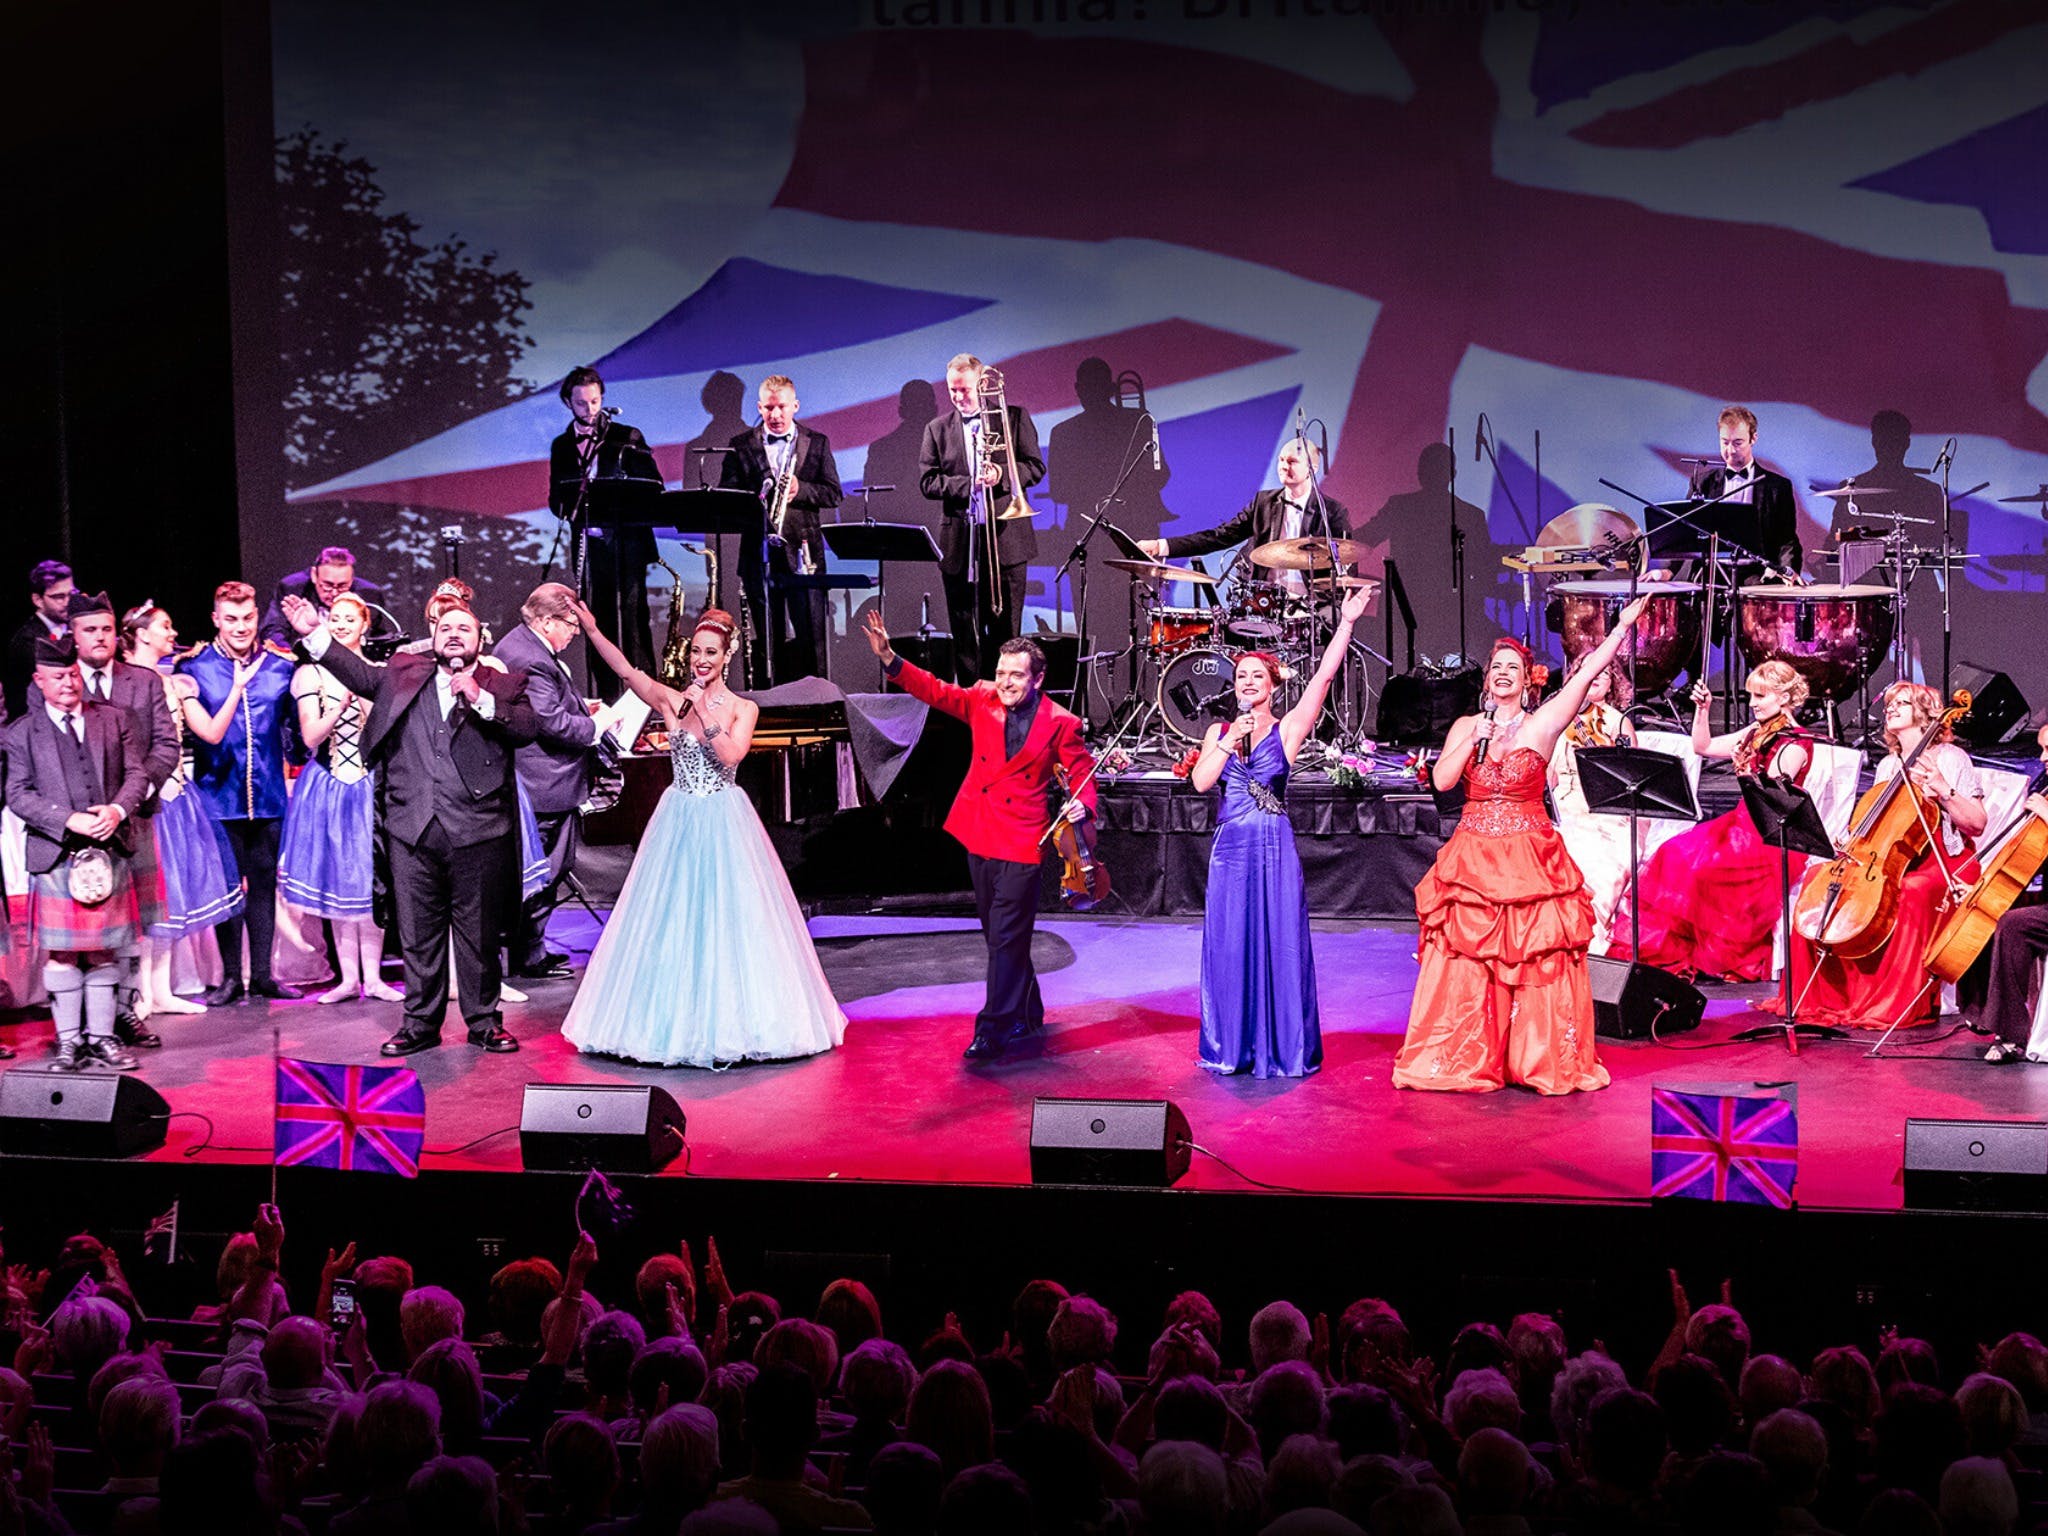 An Afternoon at the Proms - A Musical Spectacular - Accommodation Brunswick Heads